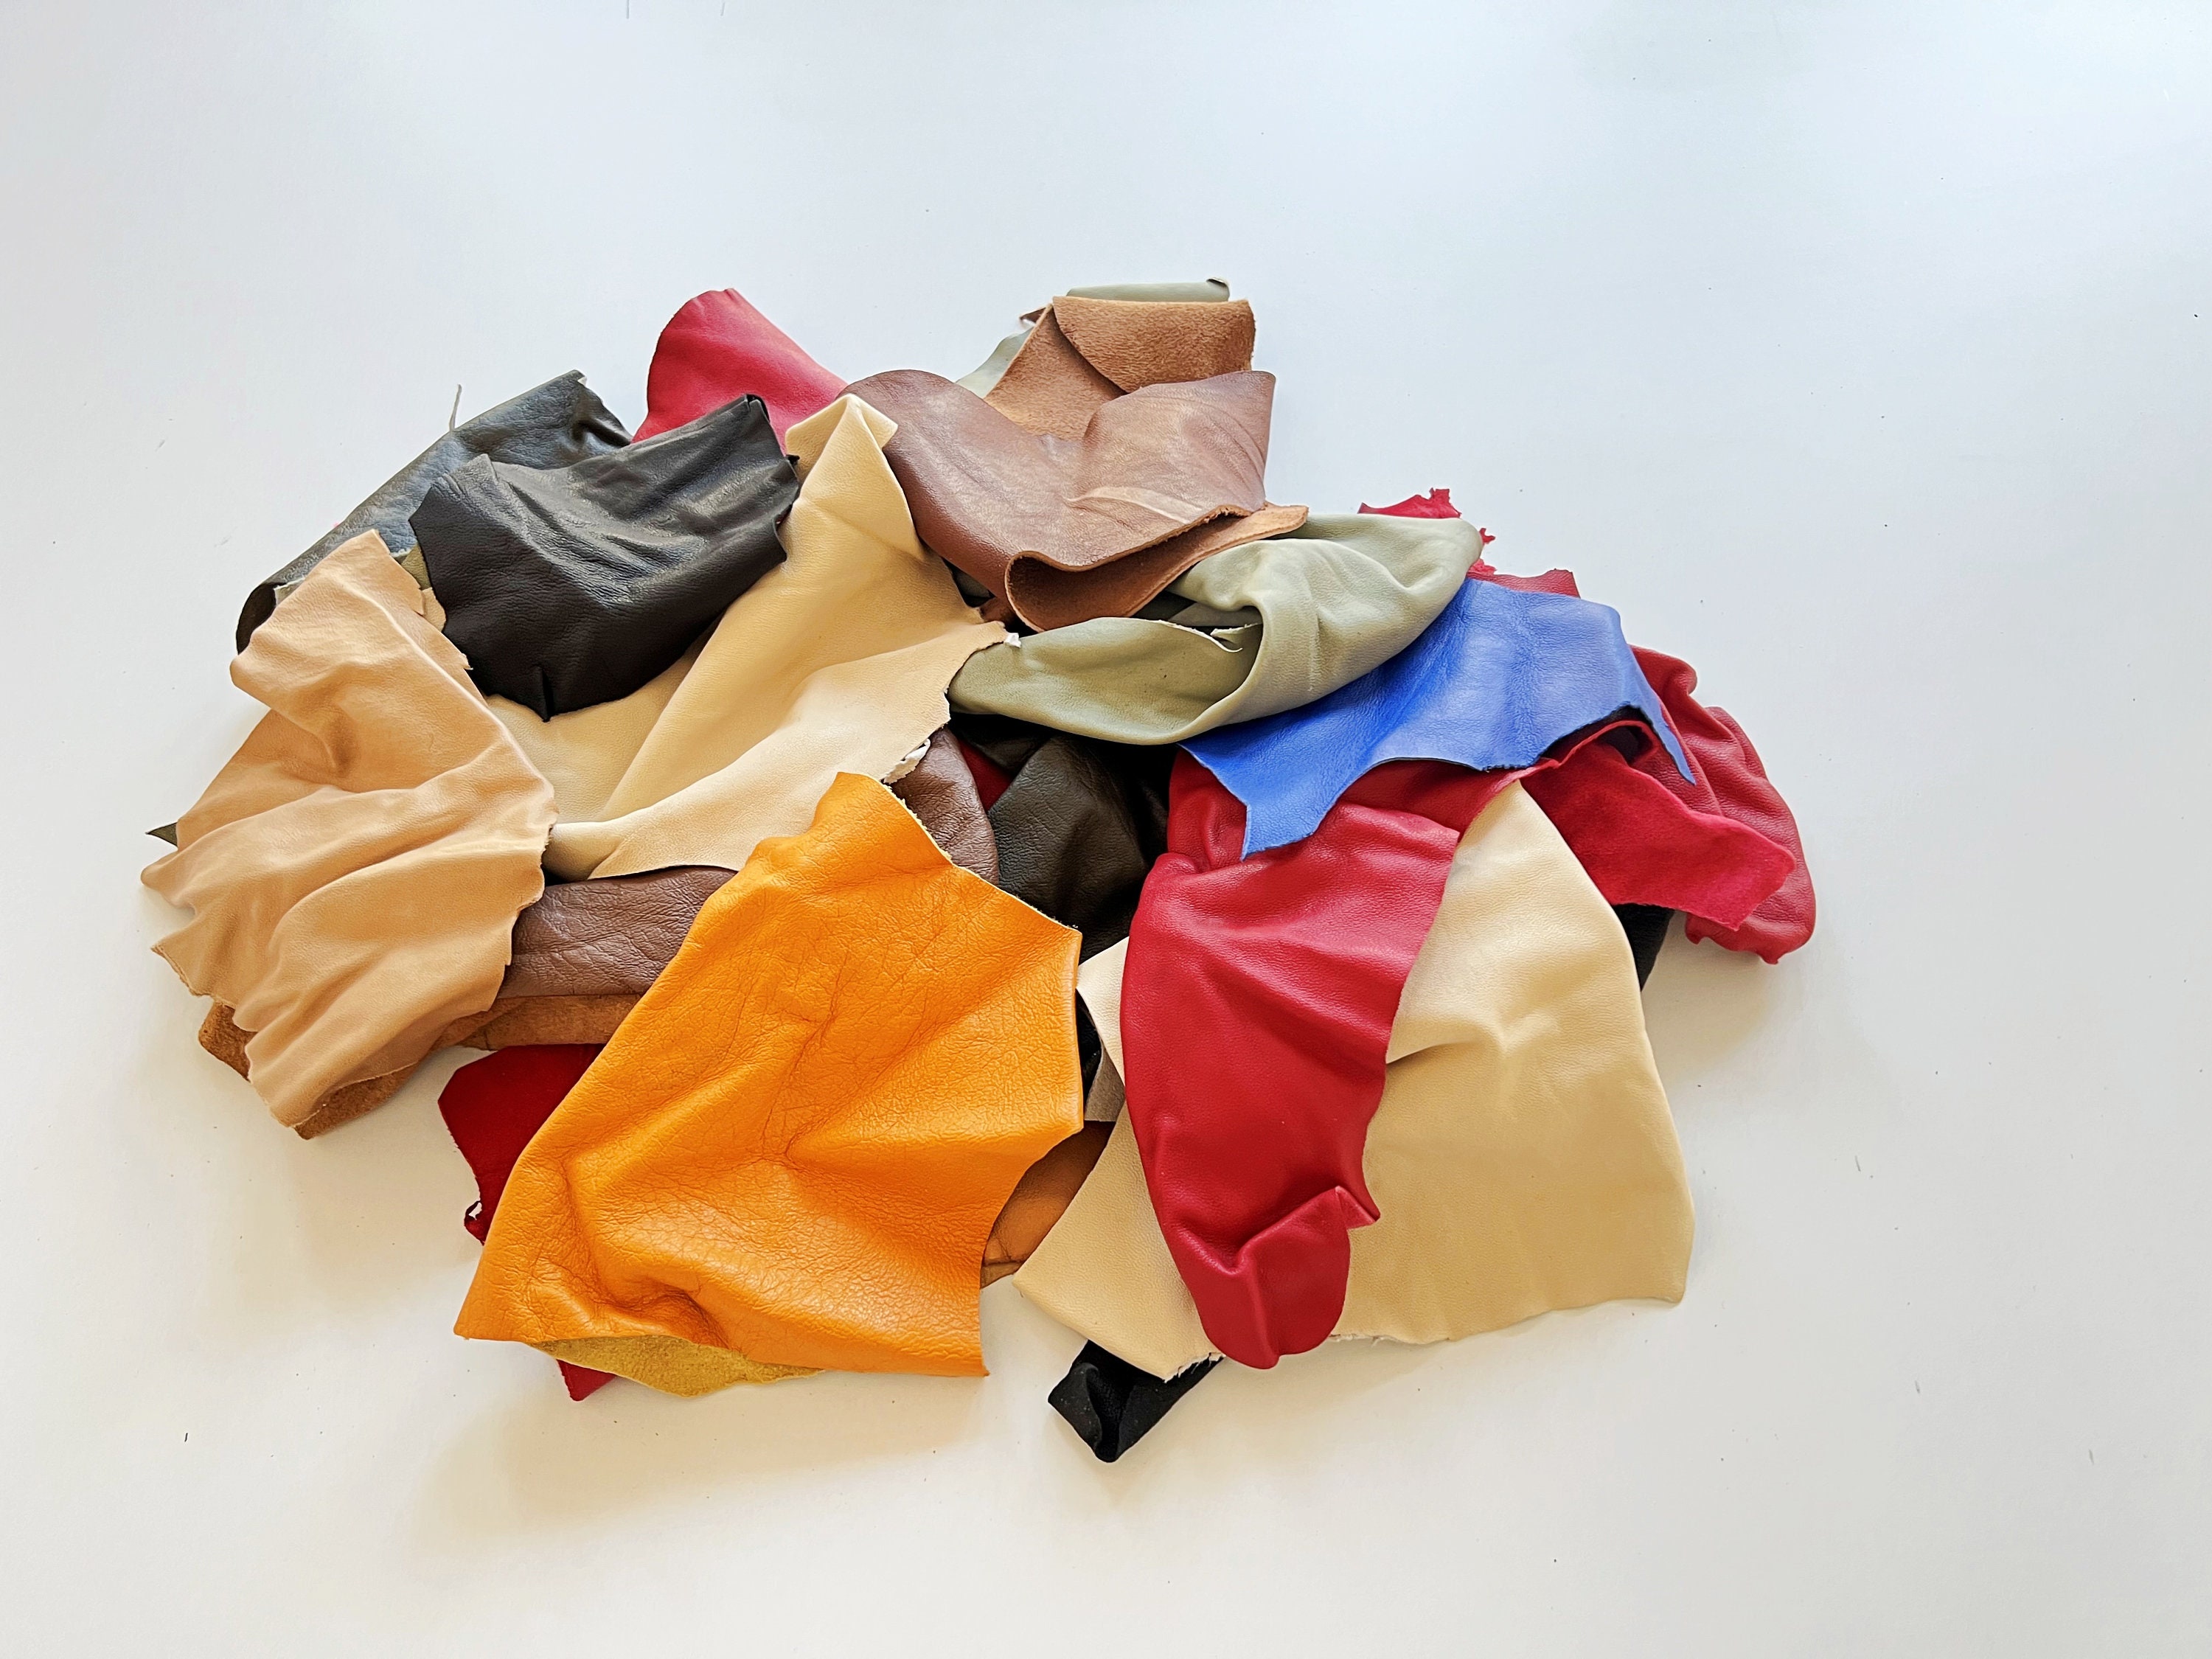 Scrap Upholstery Leather - remnants, Soft and Flexible - Various Sizes,  Shapes and Colors - 5 lbs. - 7 to 20 Pieces